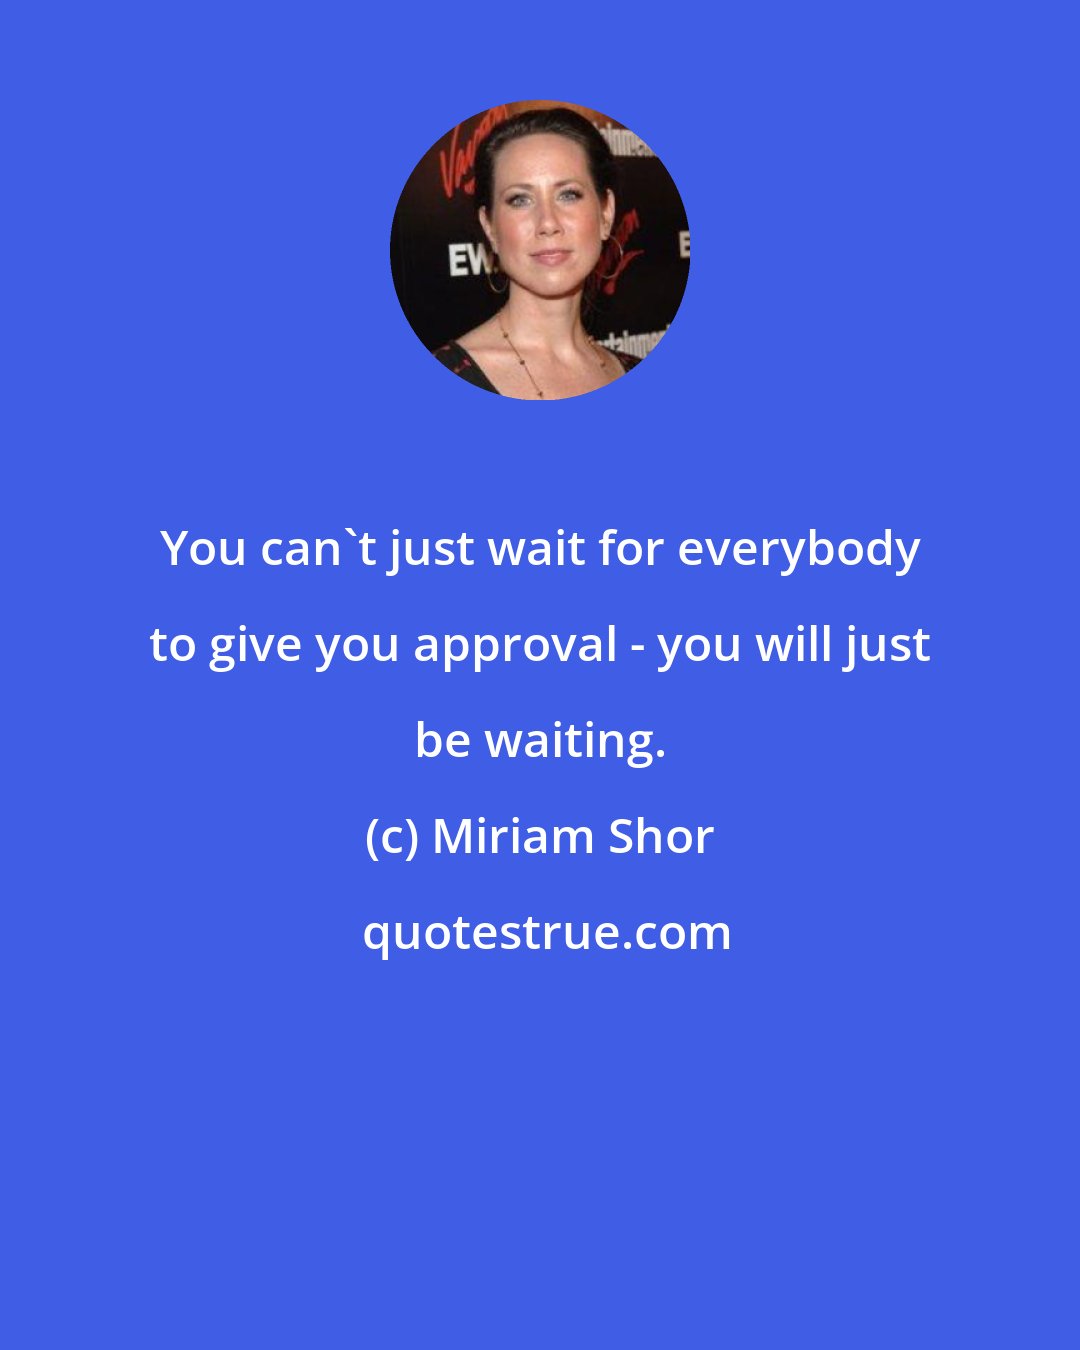 Miriam Shor: You can't just wait for everybody to give you approval - you will just be waiting.